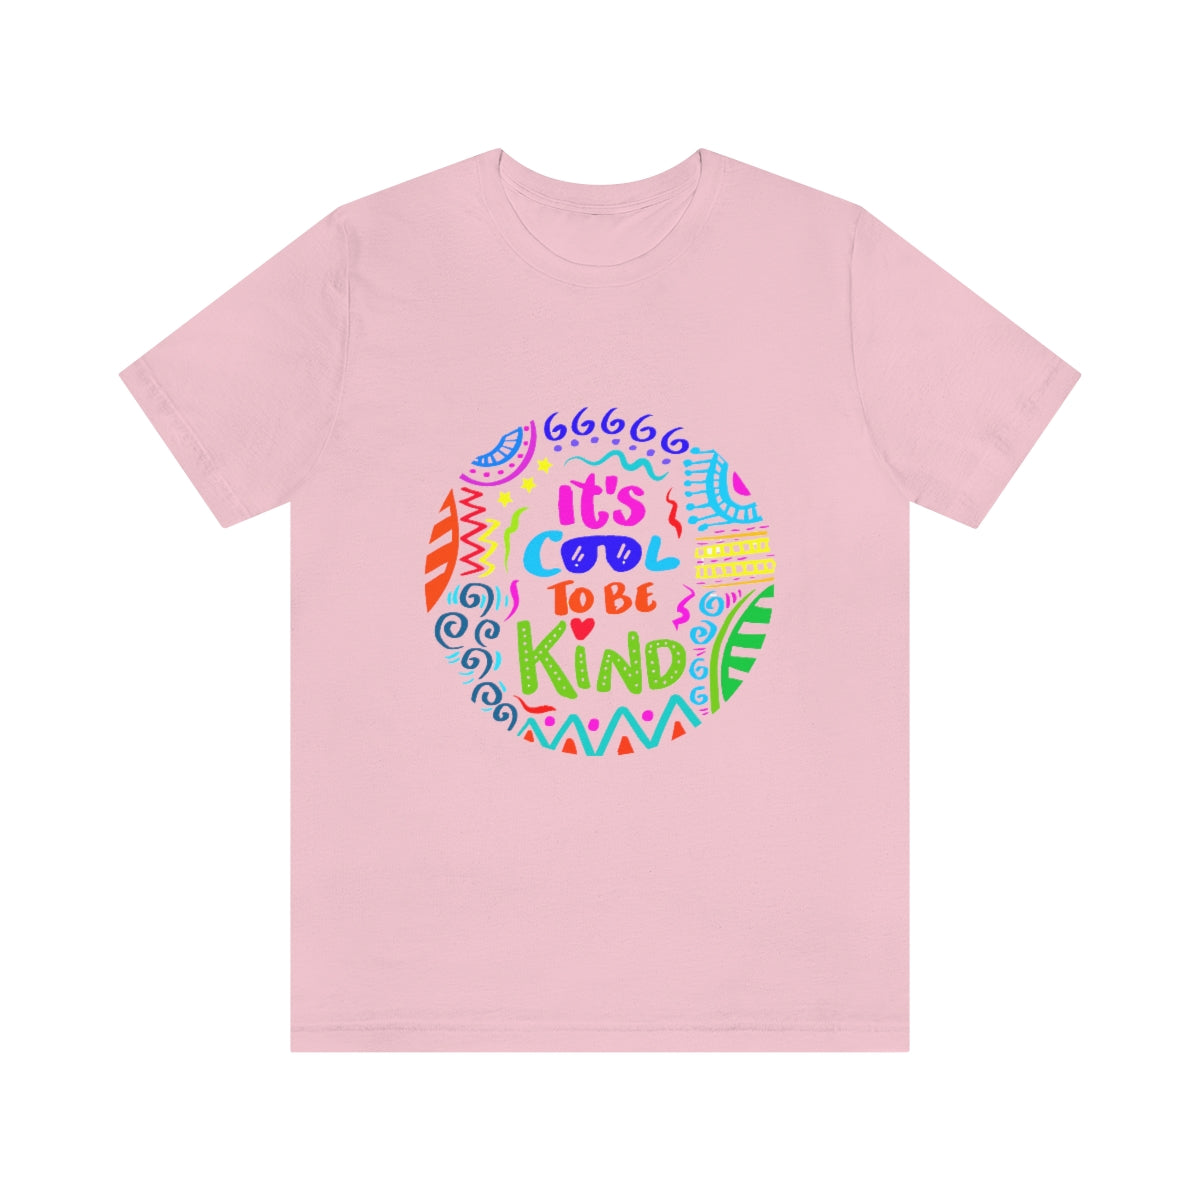 Unisex Jersey Short Sleeve Tee "Pink shirt DAY It's cool to be KIND"